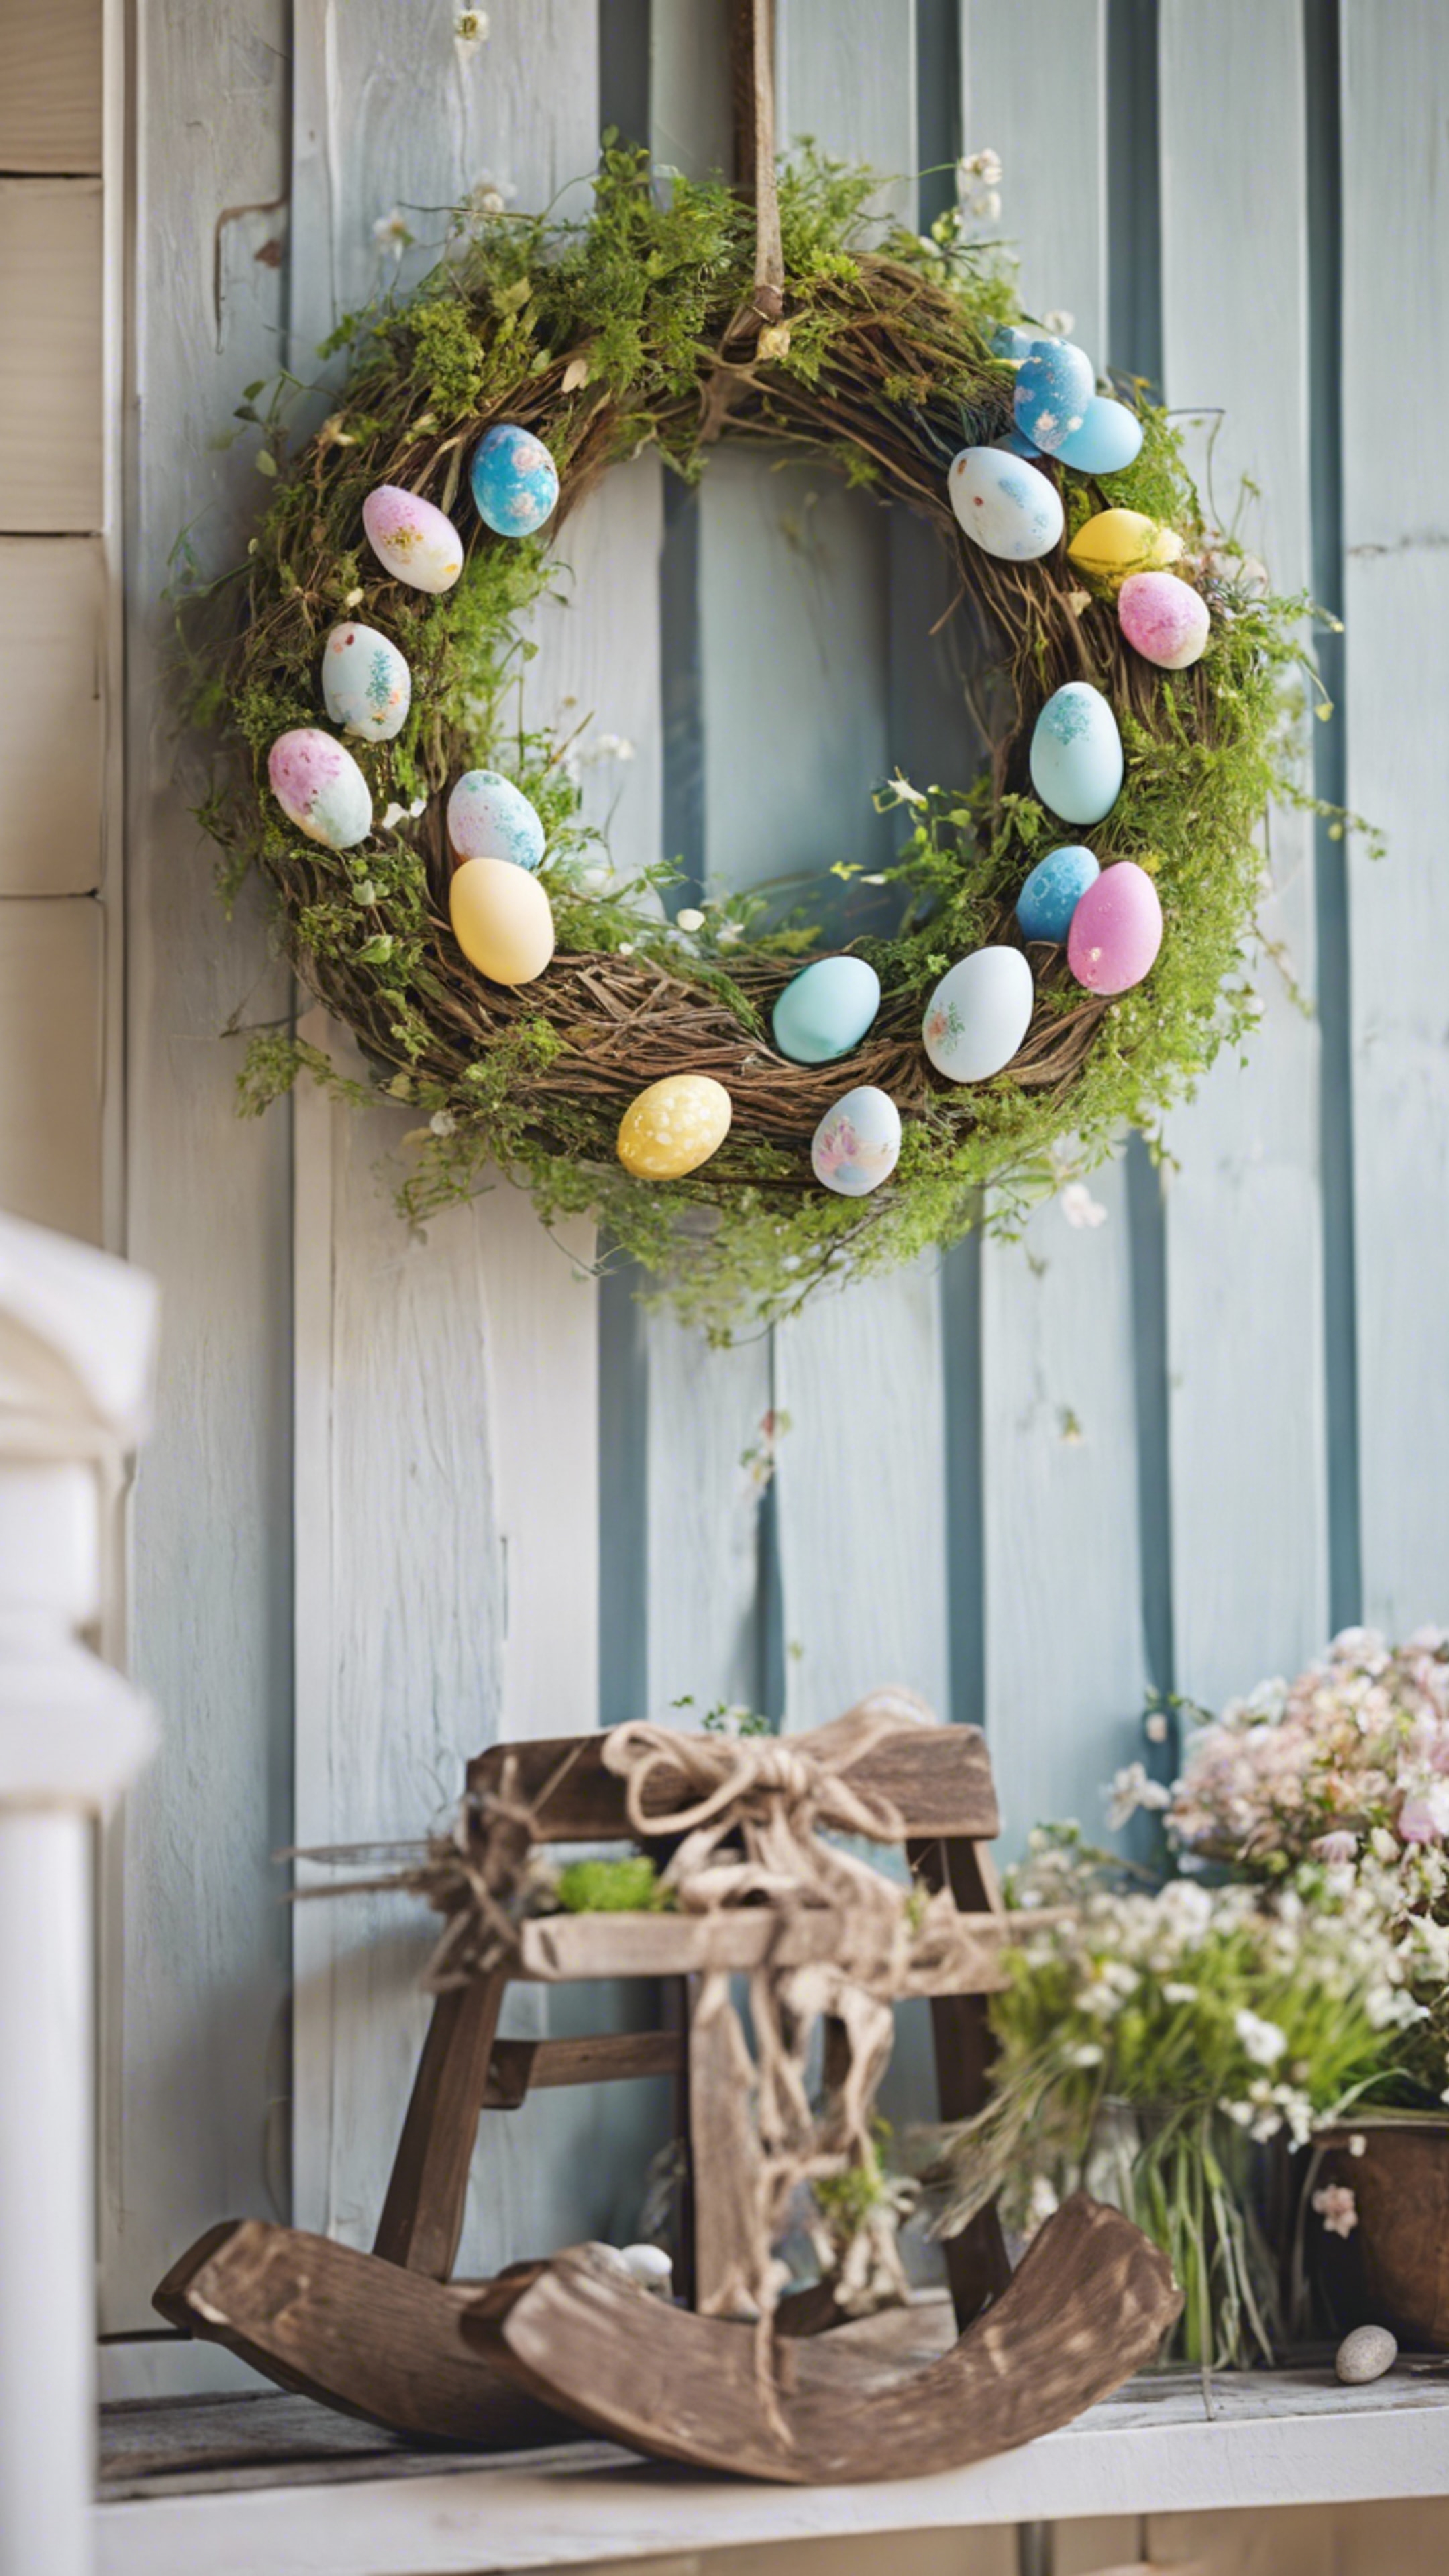 Country-style Easter decorative wreath hanging on a front porch, inviting the spring spirits. Kertas dinding[efa72fd9539f4de39955]